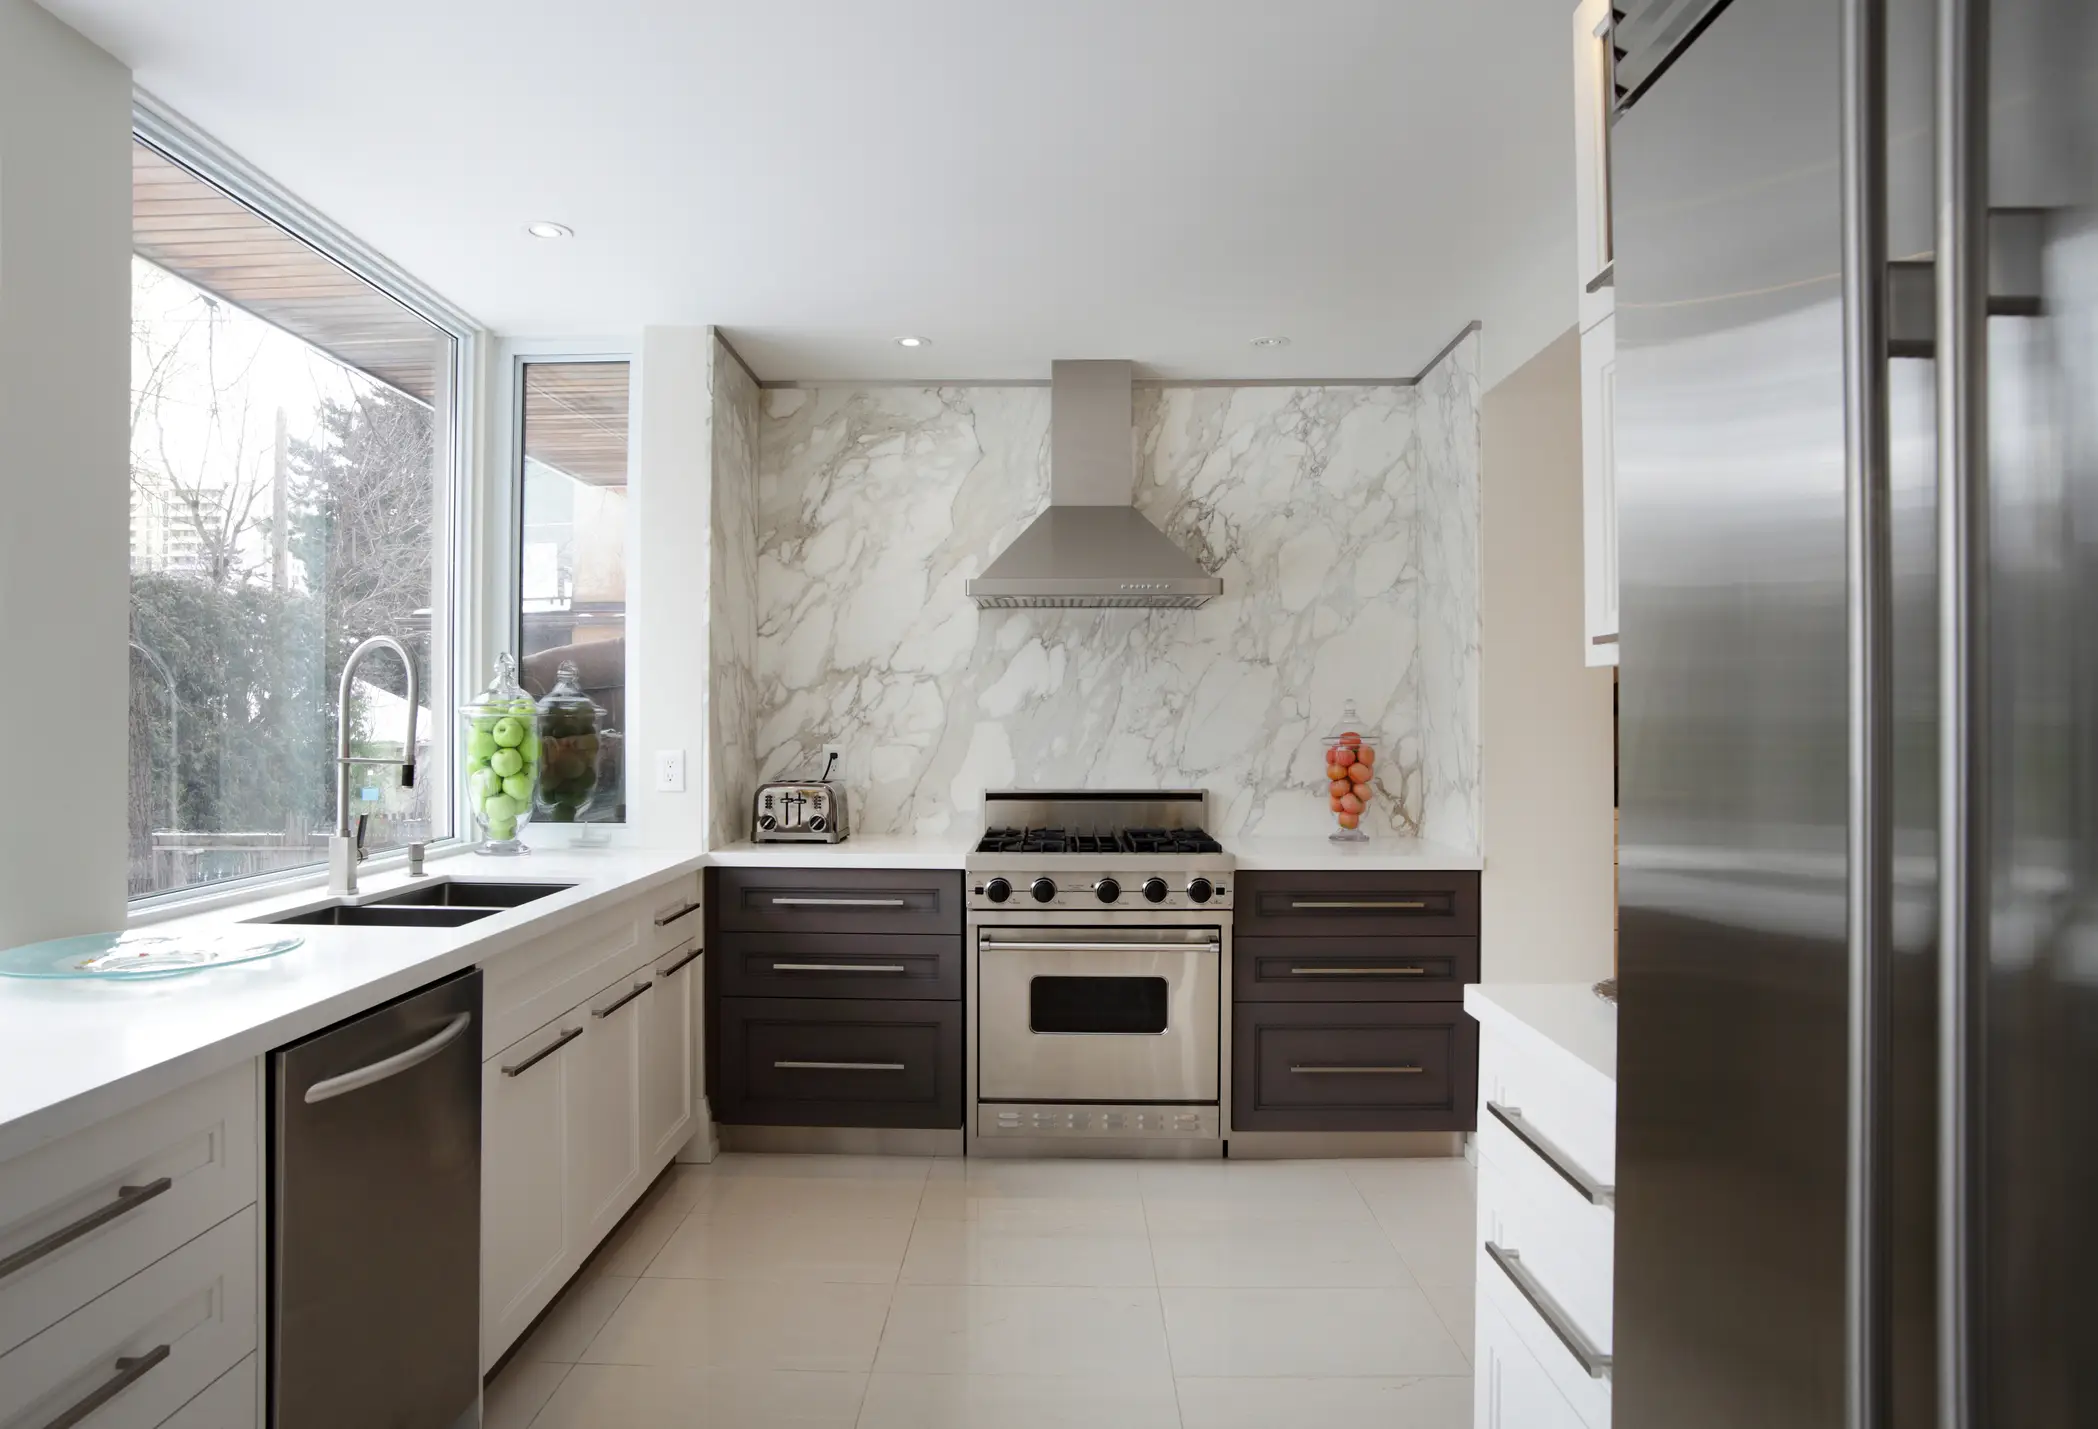 Why You Should Consider Renovating Your Kitchen